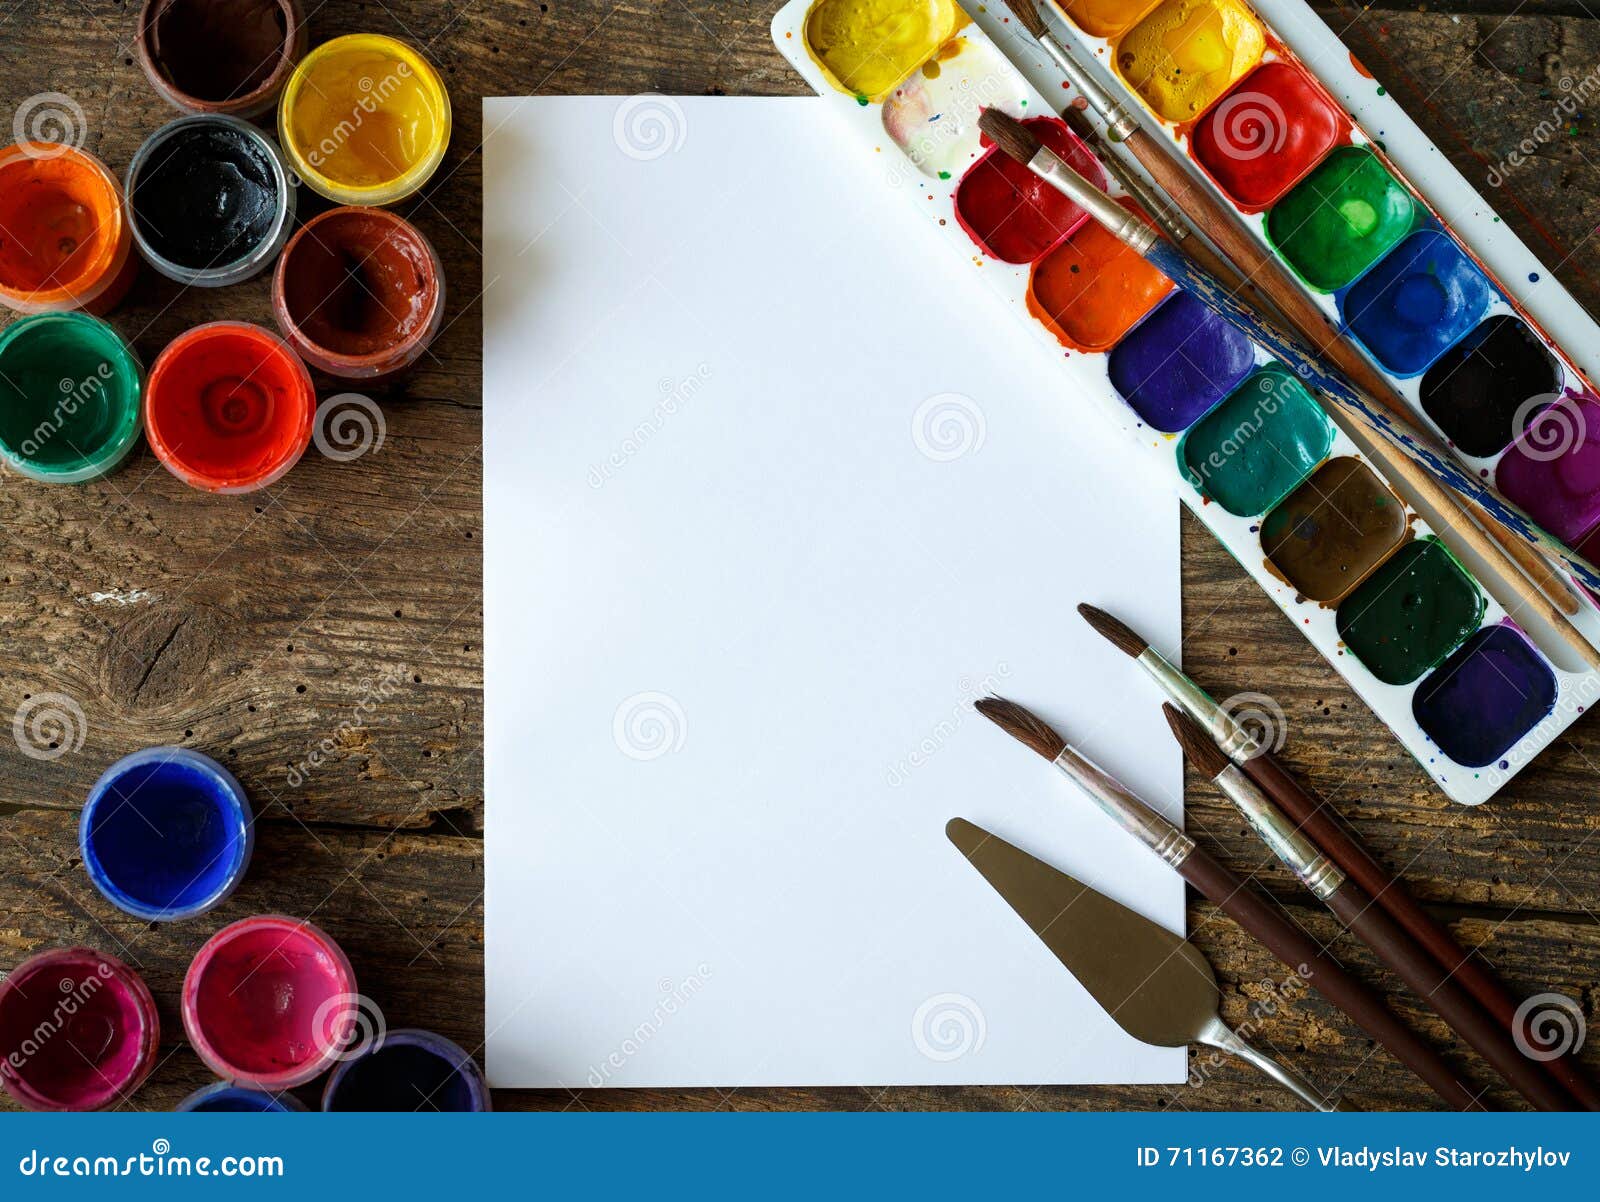 Artist Paint Brushes on the Wooden Background Stock Image - Image of  multicolor, board: 123686783